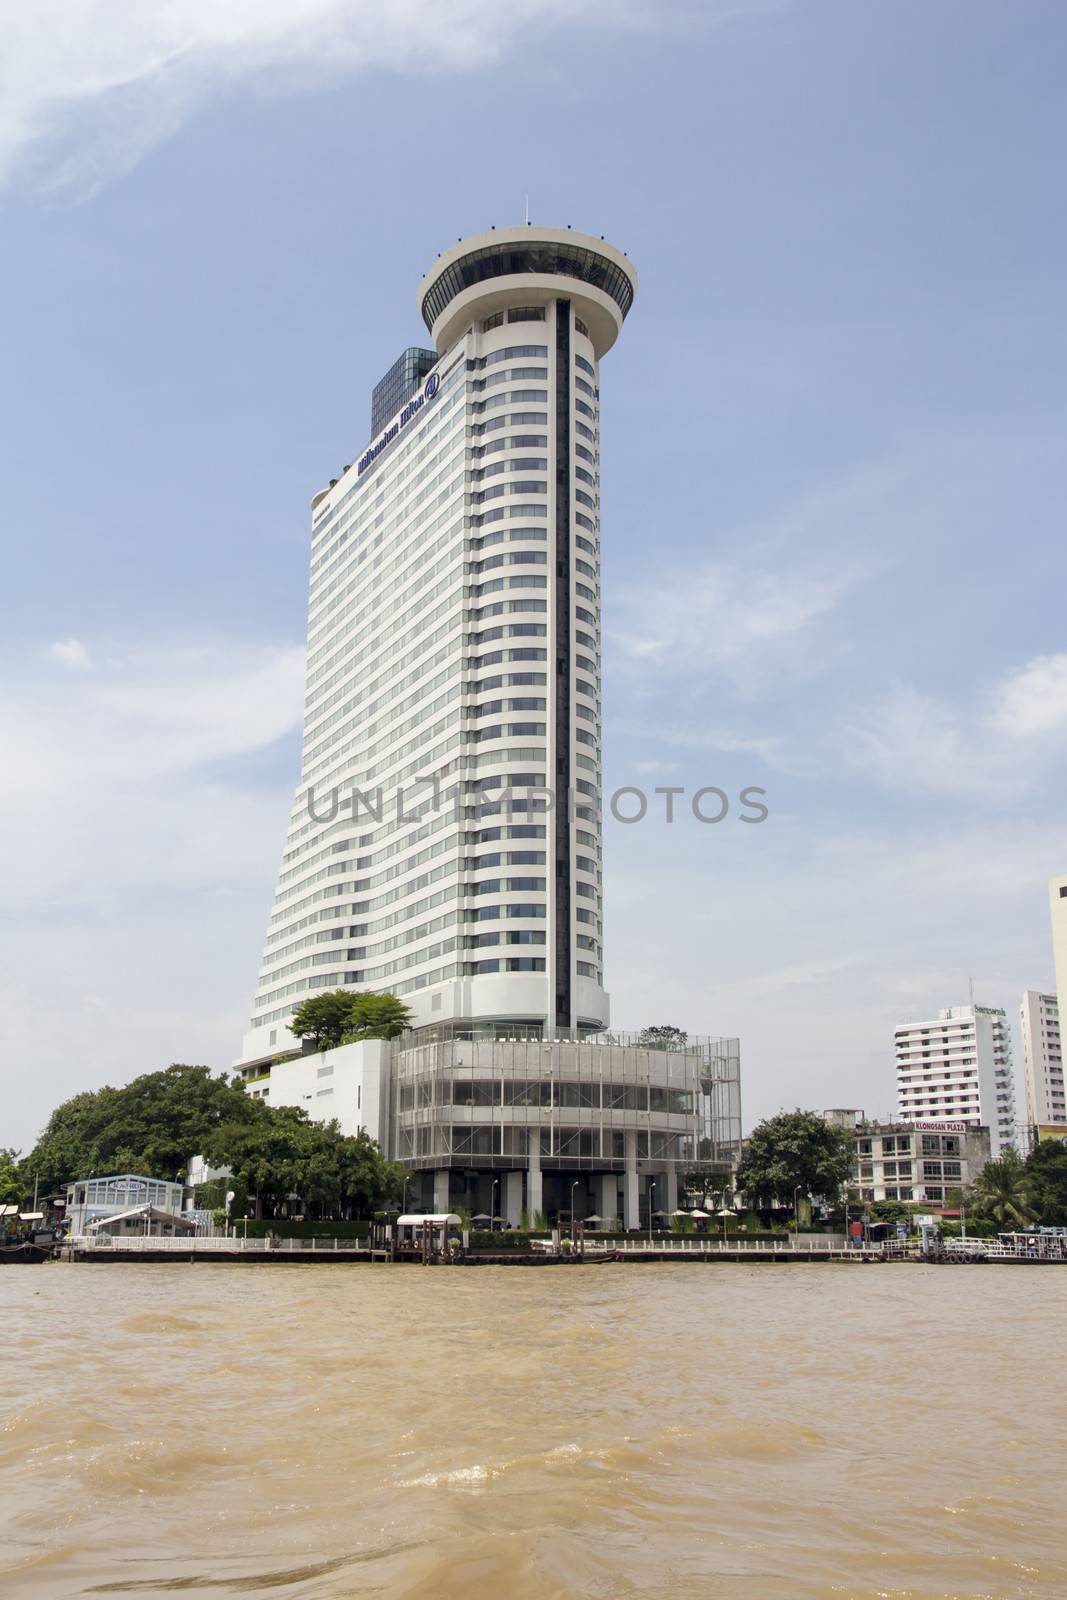 BANGKOK, THAILAND- SEP 25TH: The Hilton Millenium hotel on the Chao Phraya river, Bangkok on September 25th 2012. Founded in 1919, Hilton has more than 550 hotels across 6 continents.